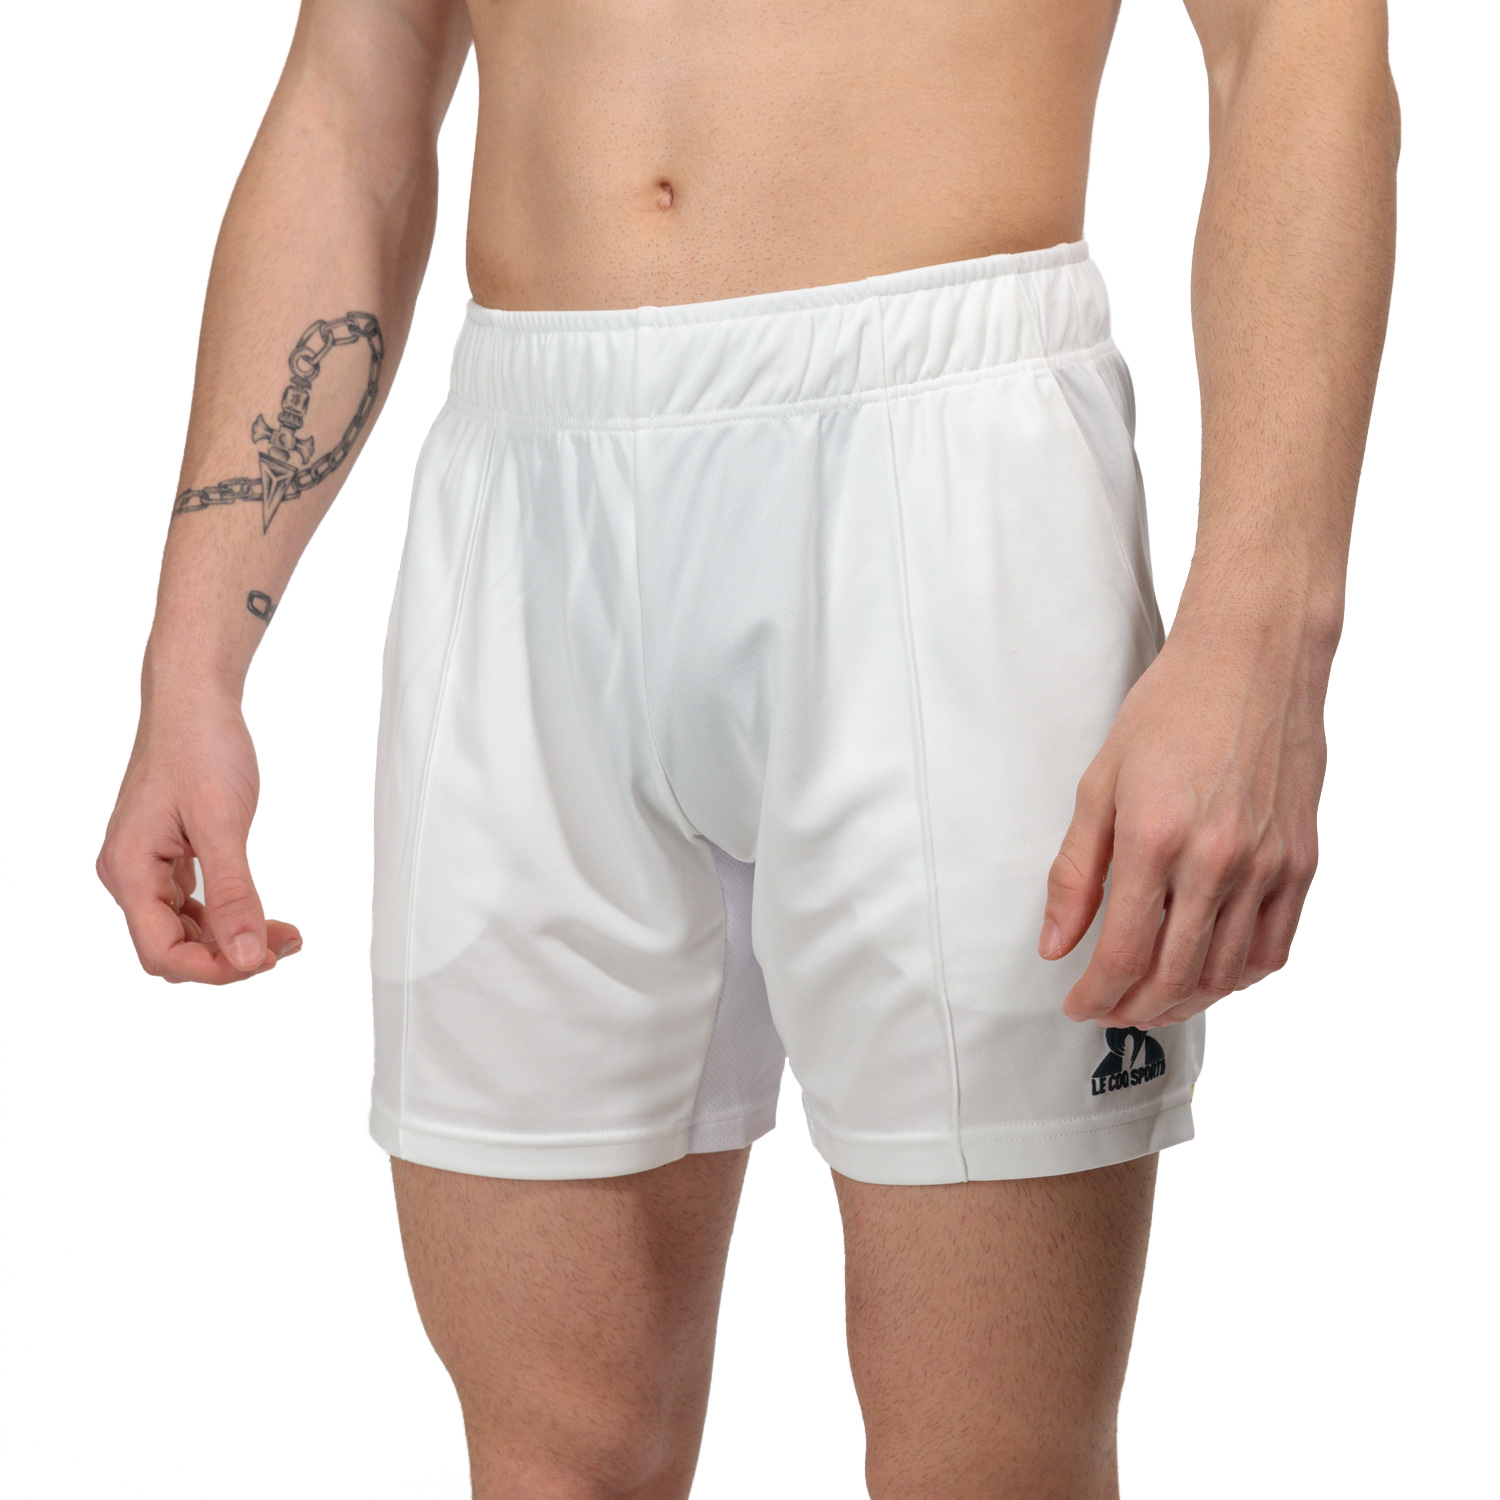 Le Coq Sportif Pro 7in Shorts - New Optical White